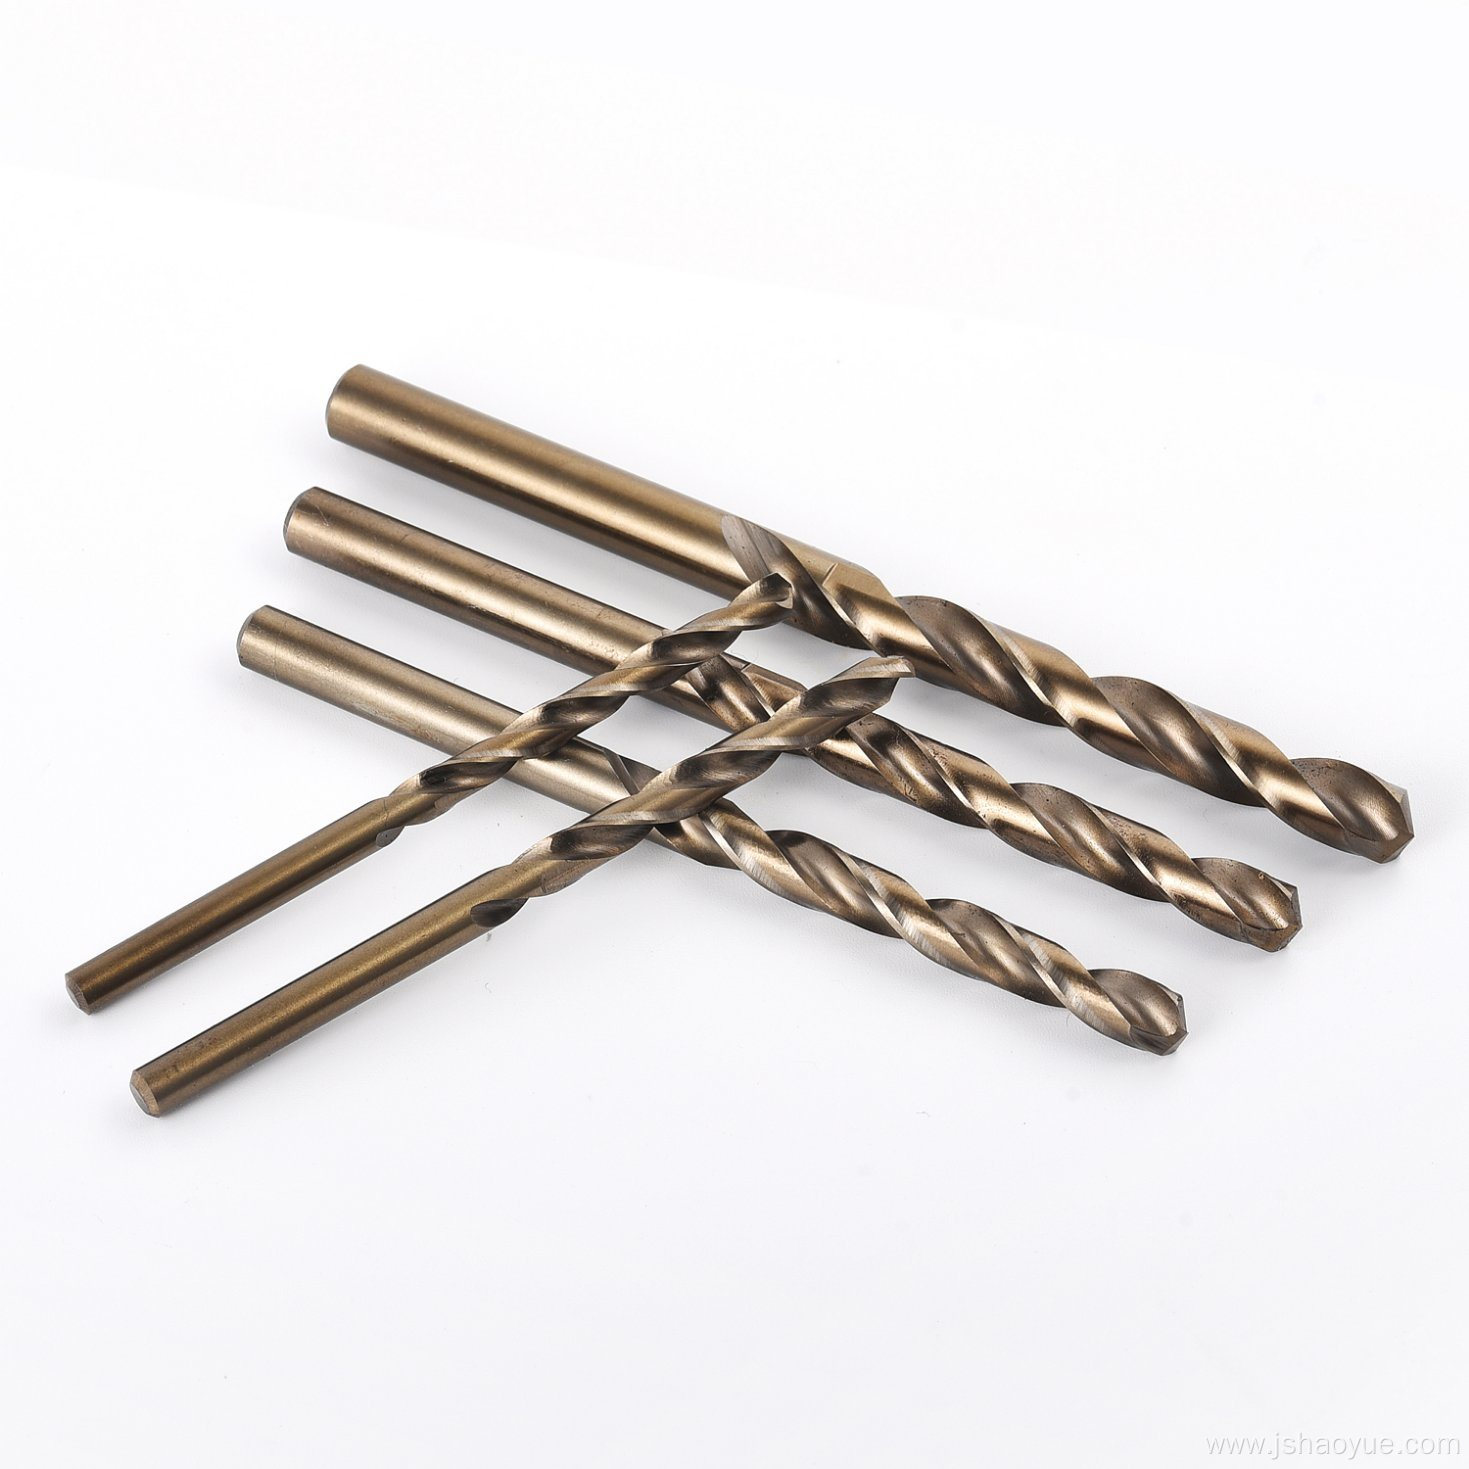 Twist Drill Bit for Drilling Metal Stainless Steel